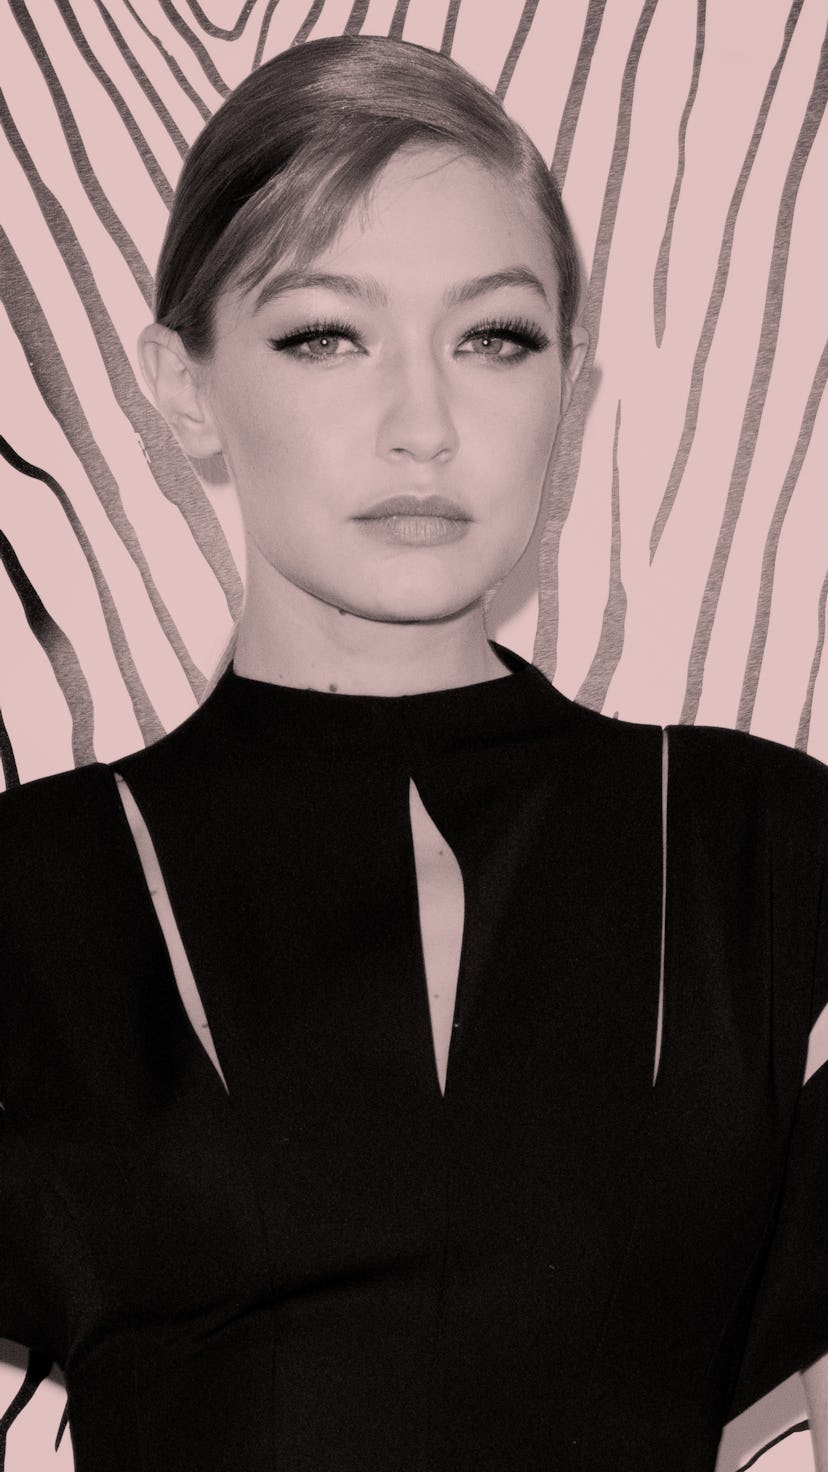 Gigi Hadid poses in a black dress, her hair pulled back in a tight bun.